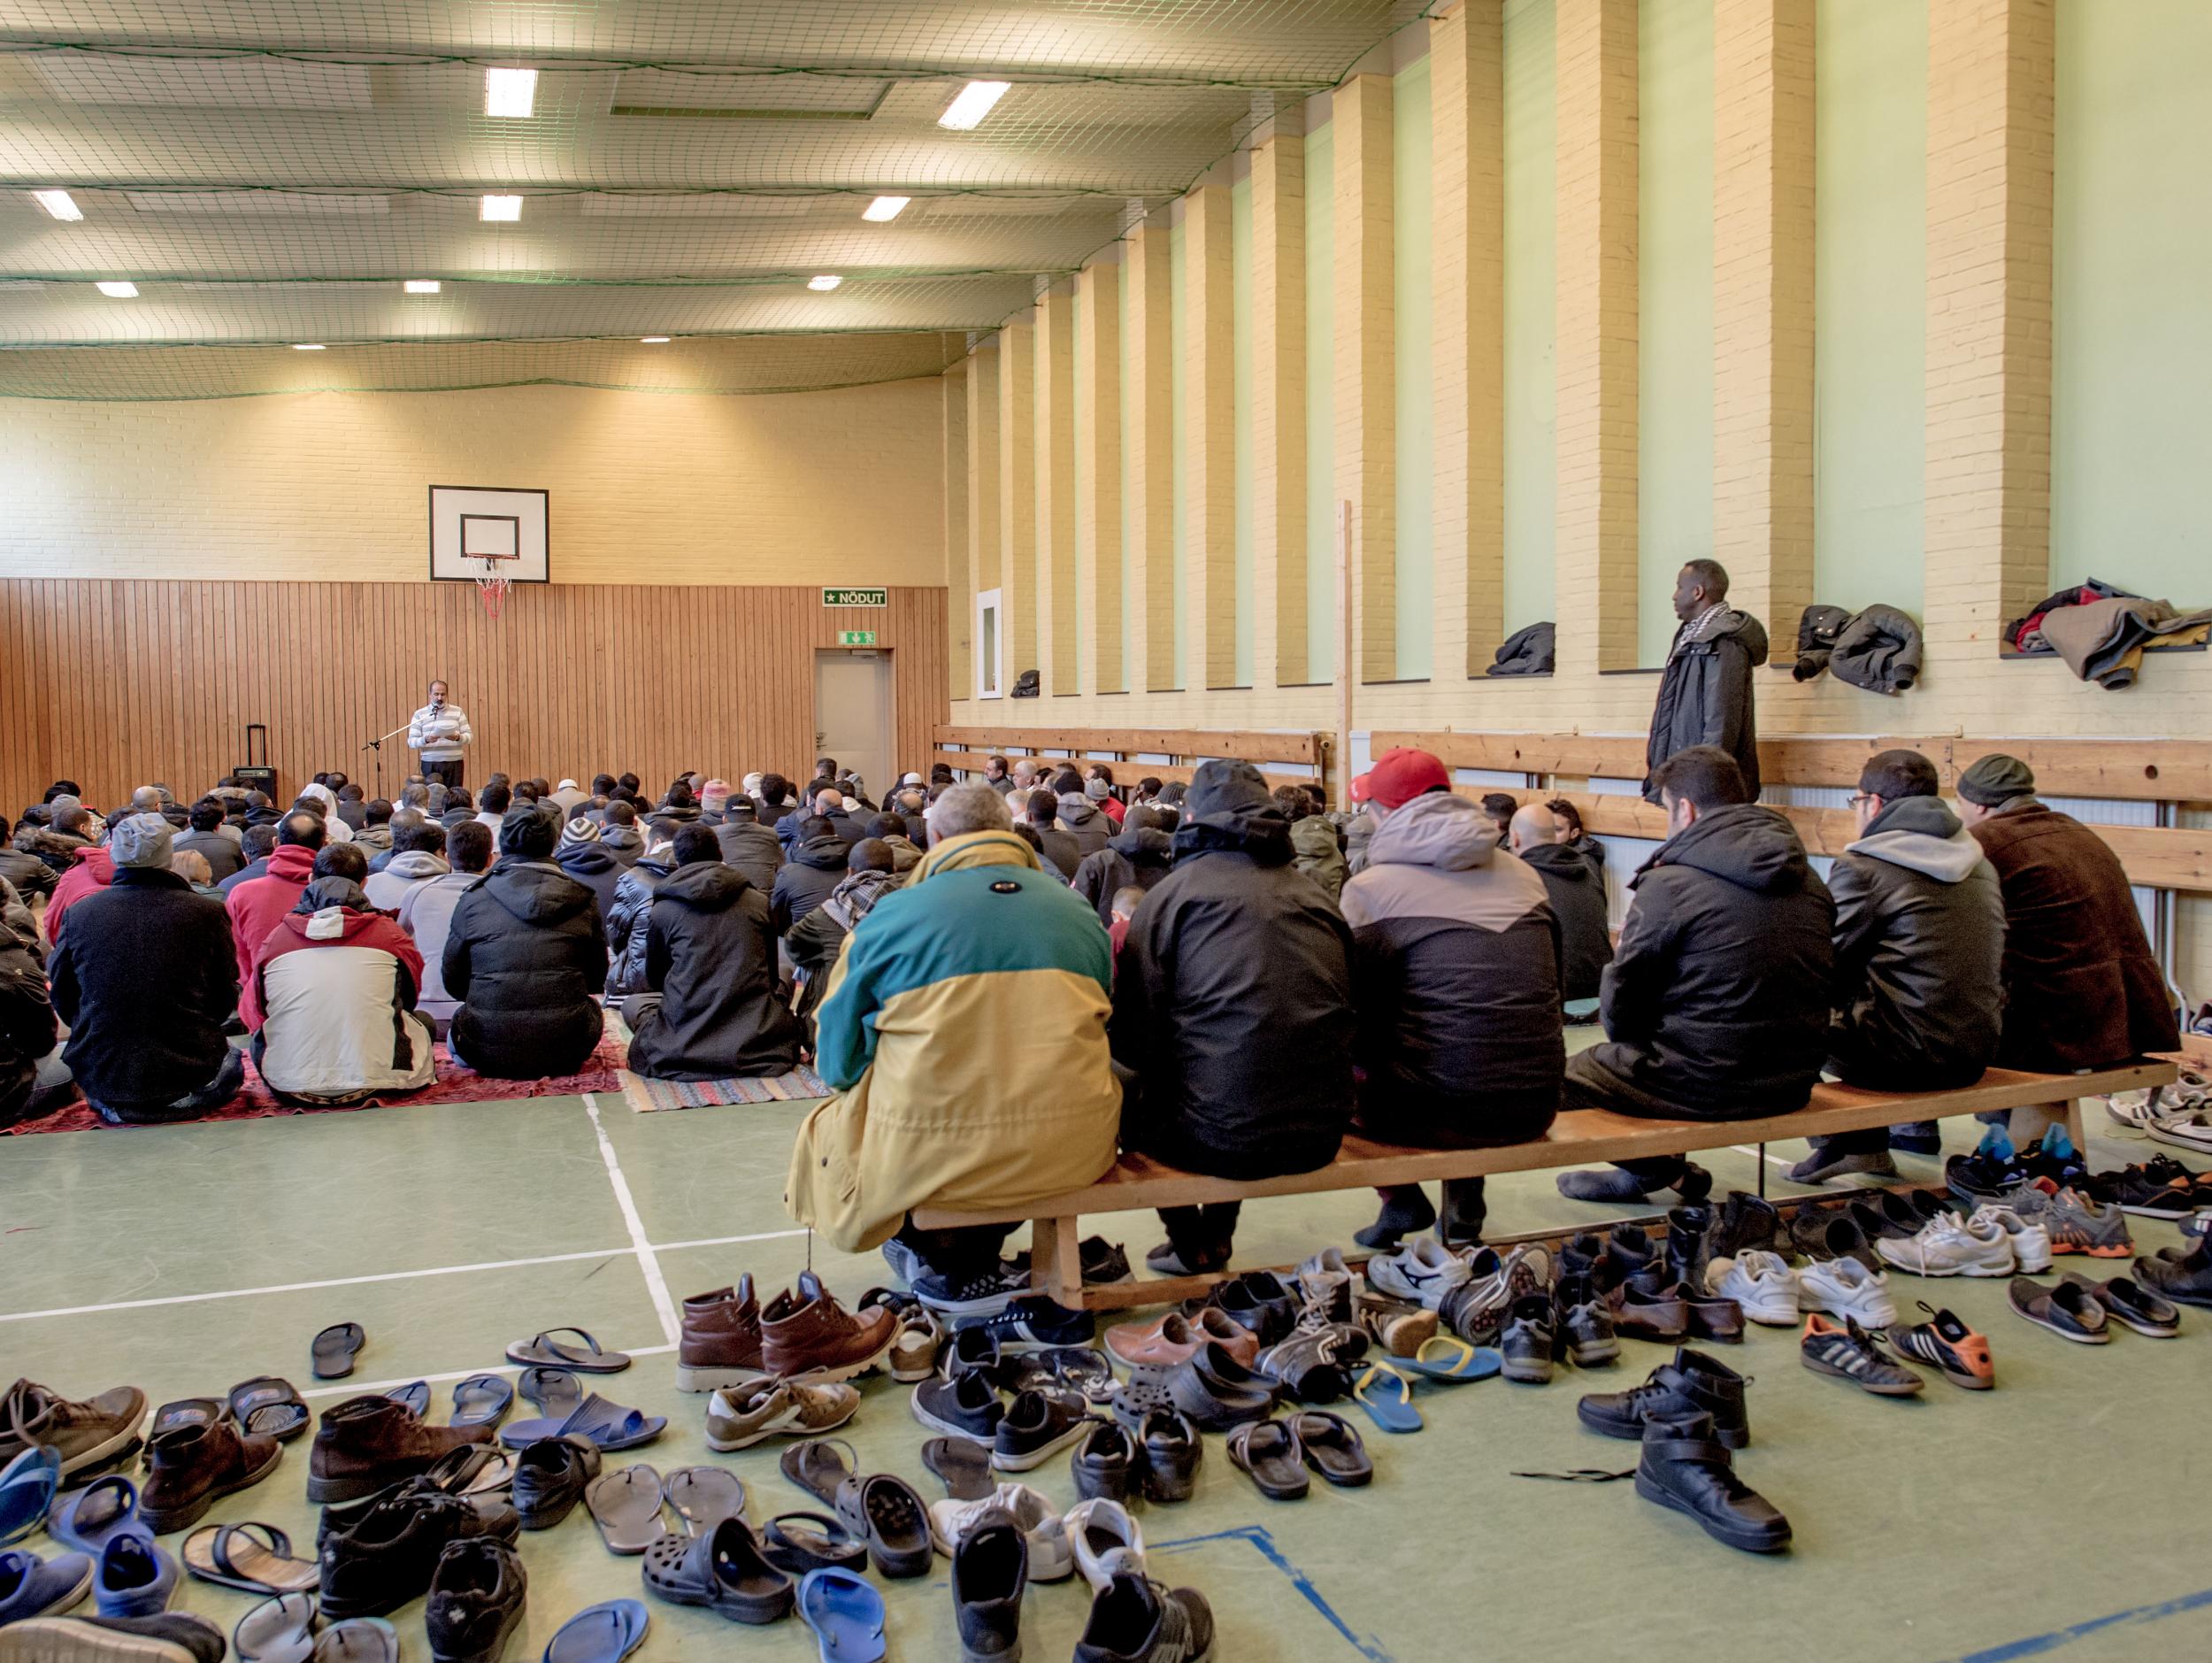 Asylum seekers pray in the gym of Sweden's largest temporary camp for migrants, in a former psychiatric hospital